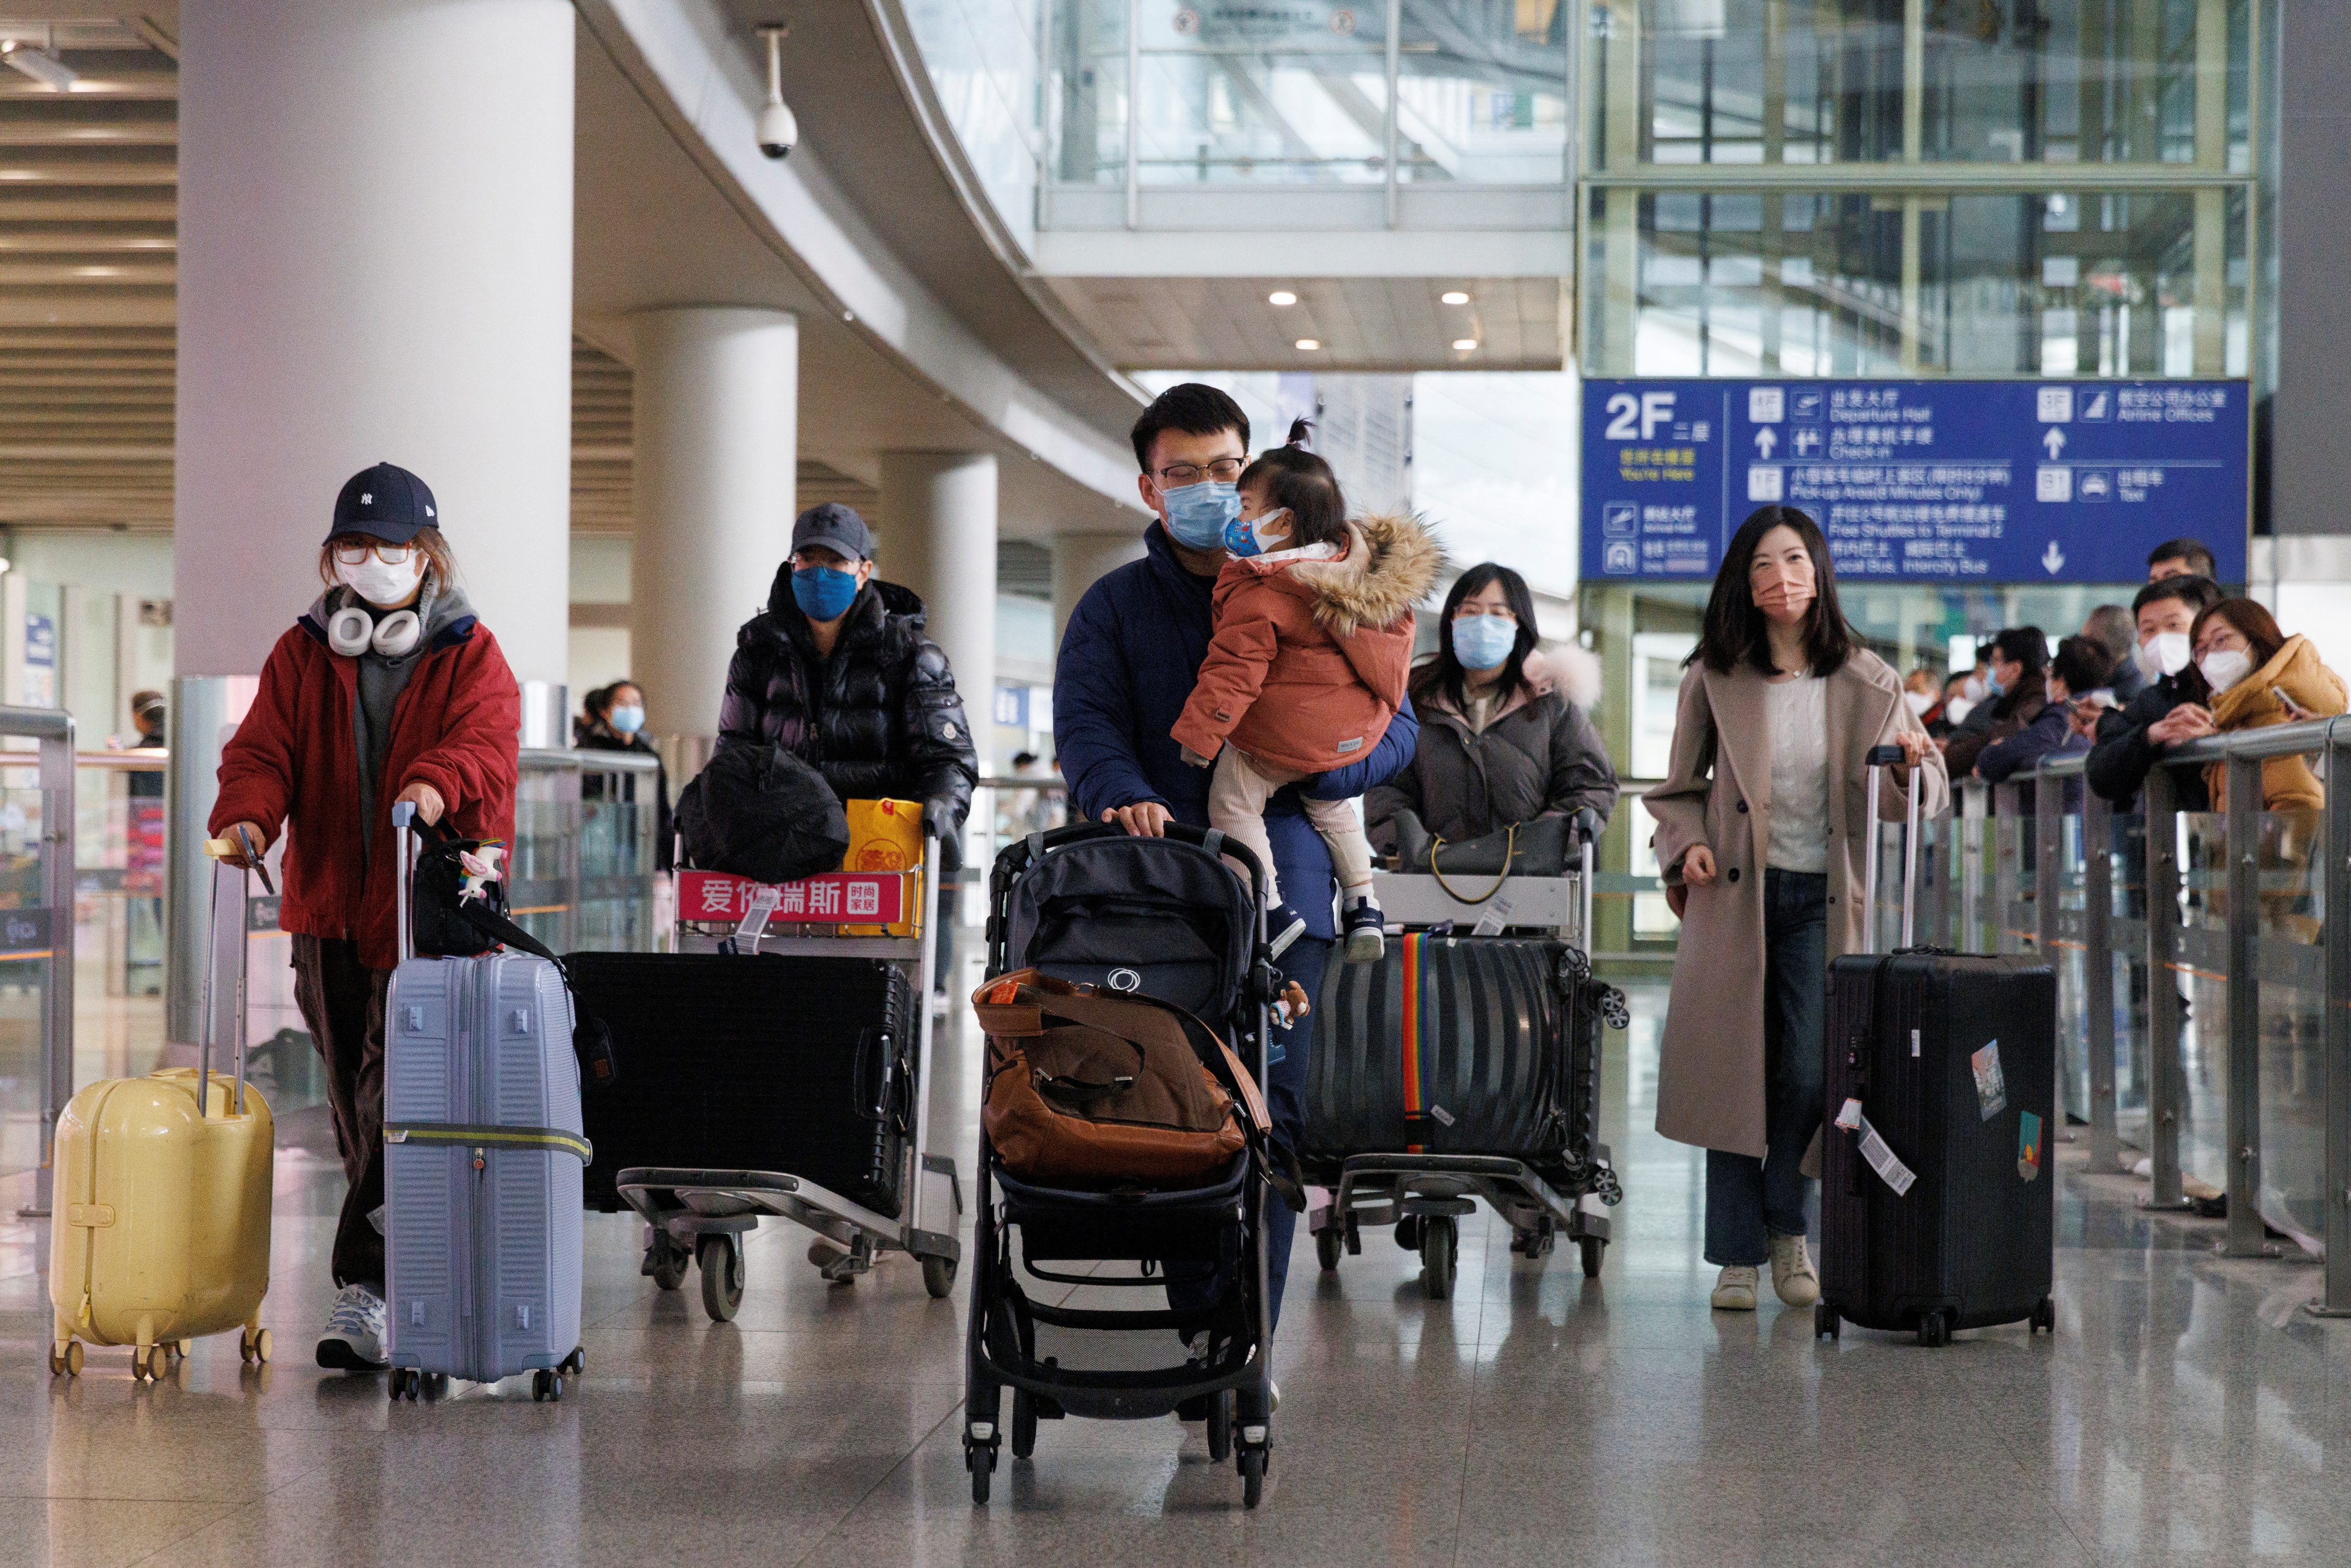 Passengers push their luggage through the international arrivals hall at Beijing Capital International Airport after China lifted its COVID-19 quarantine requirement for travelers arriving in Beijing.